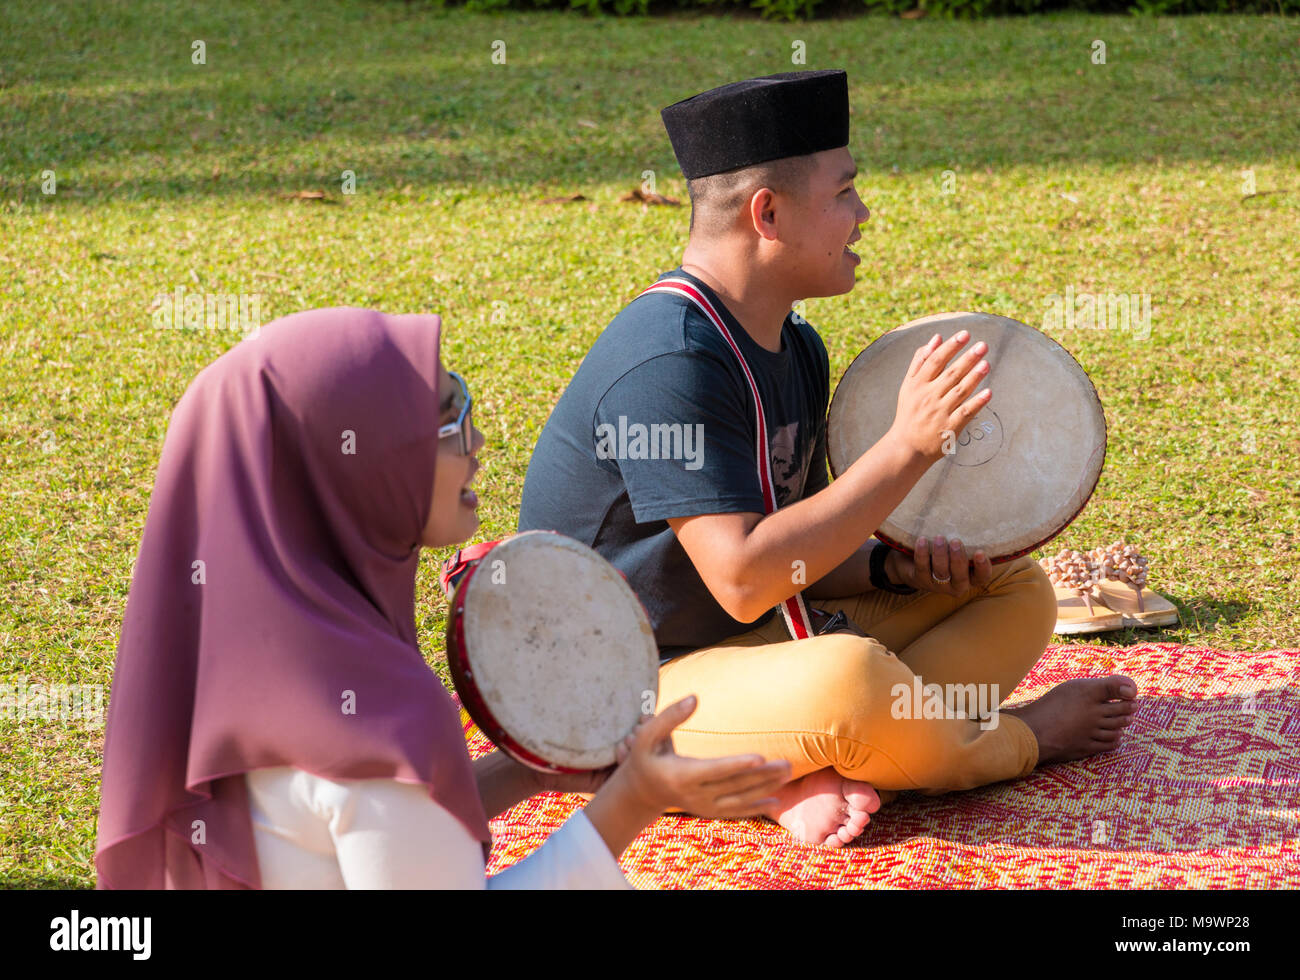 Two Malaysians, a man with a sonkok and a woman wearing a hijab, are sitting on a traditional rattan mat and playing the kompang (Malay drum). Stock Photo